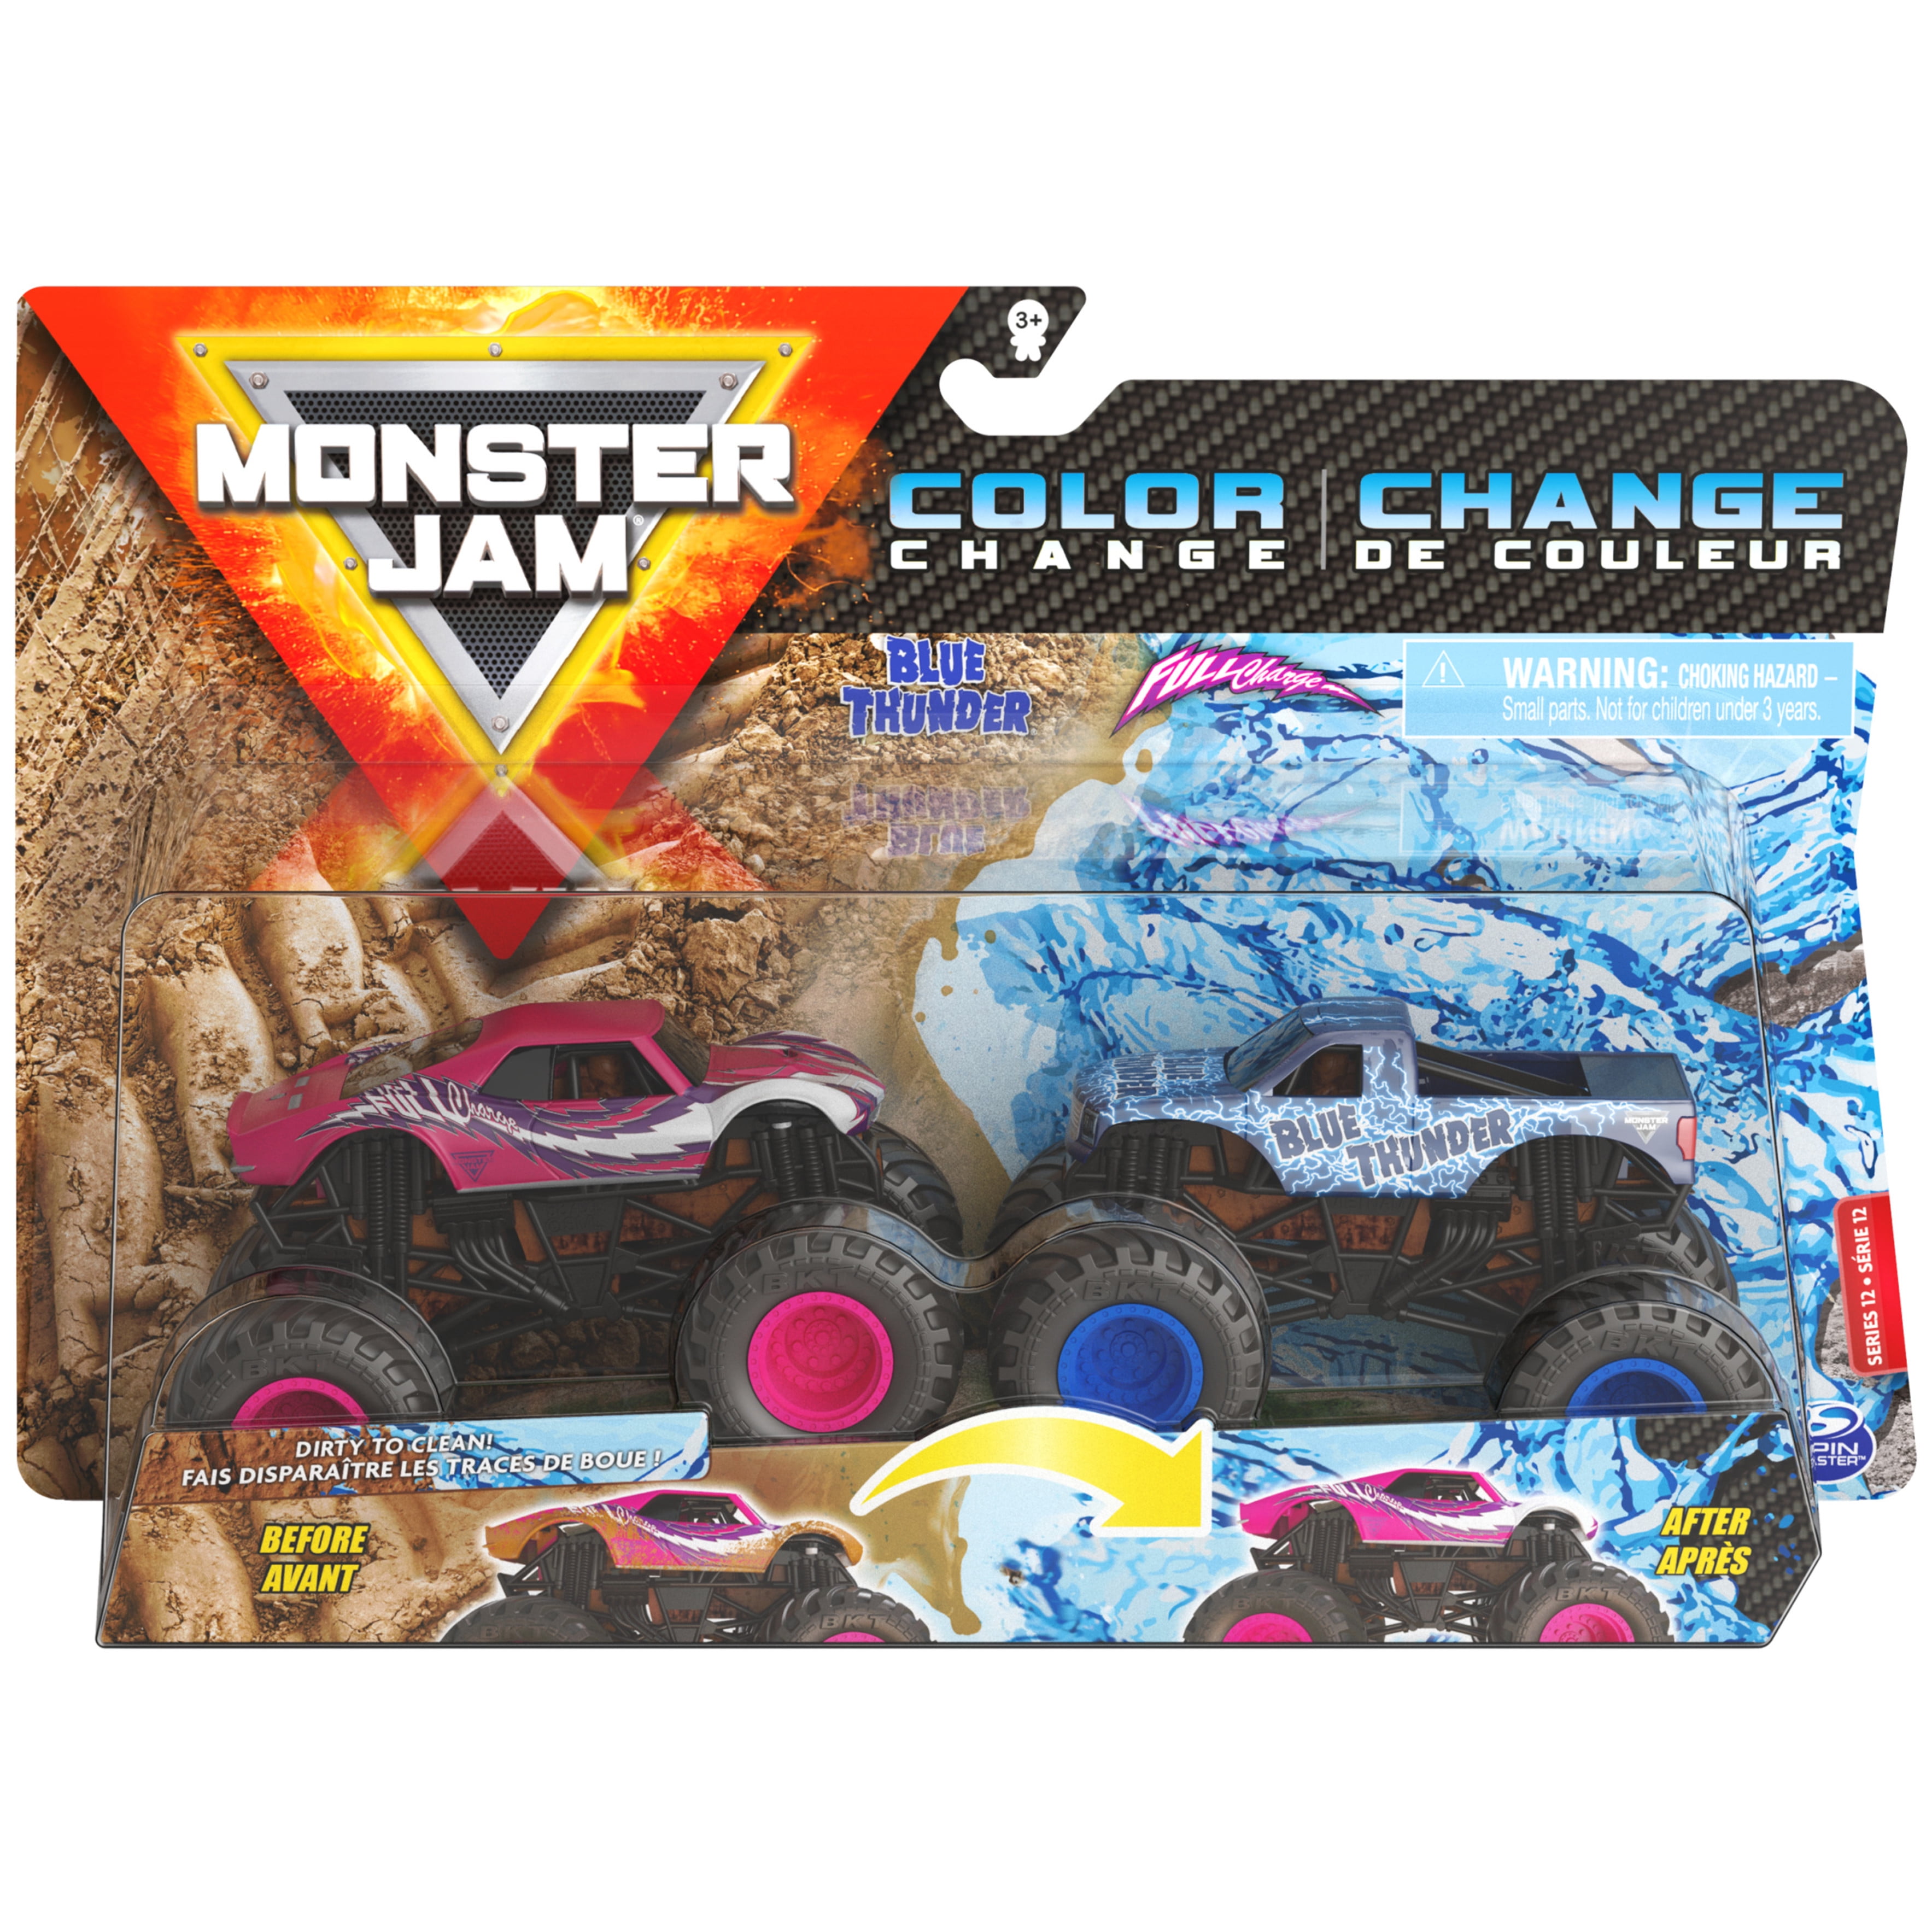 Brand New Exclusive Monster Jam Monster Truck Collection 9 Trucks Total